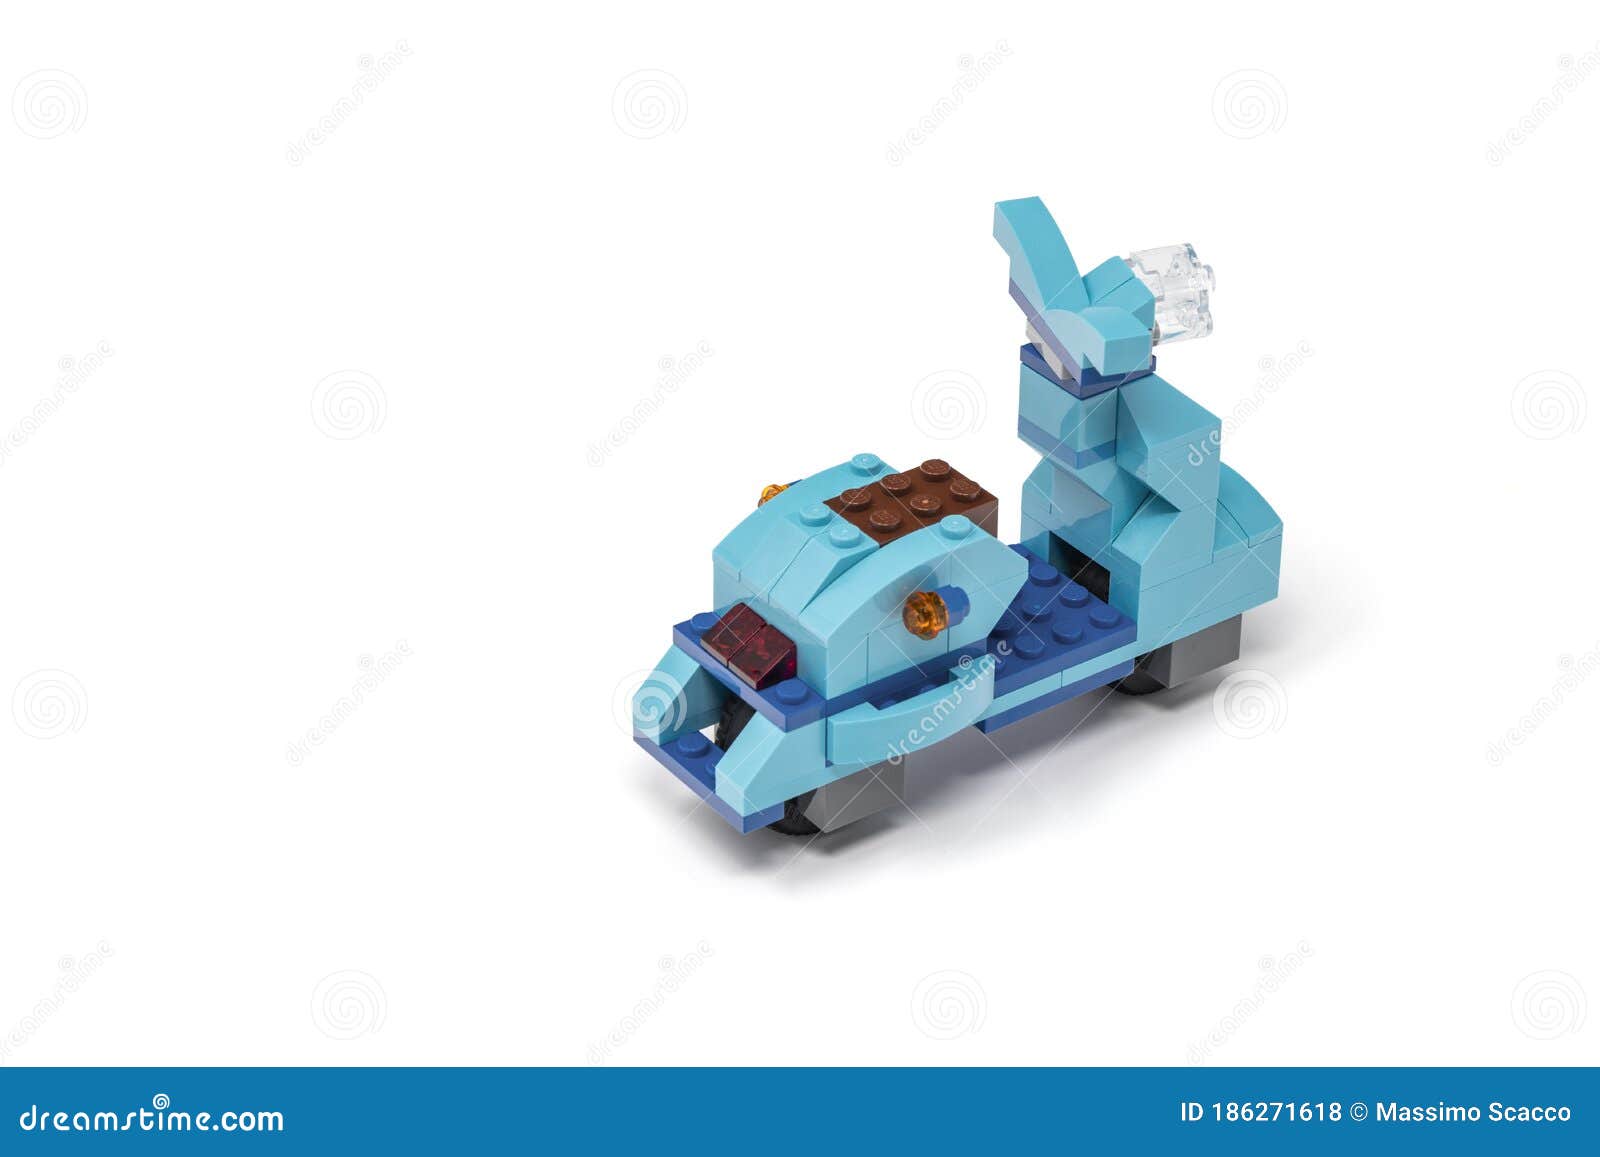 Lego Scooter Made of Building Blocks Stock Photo - Image of wasp 